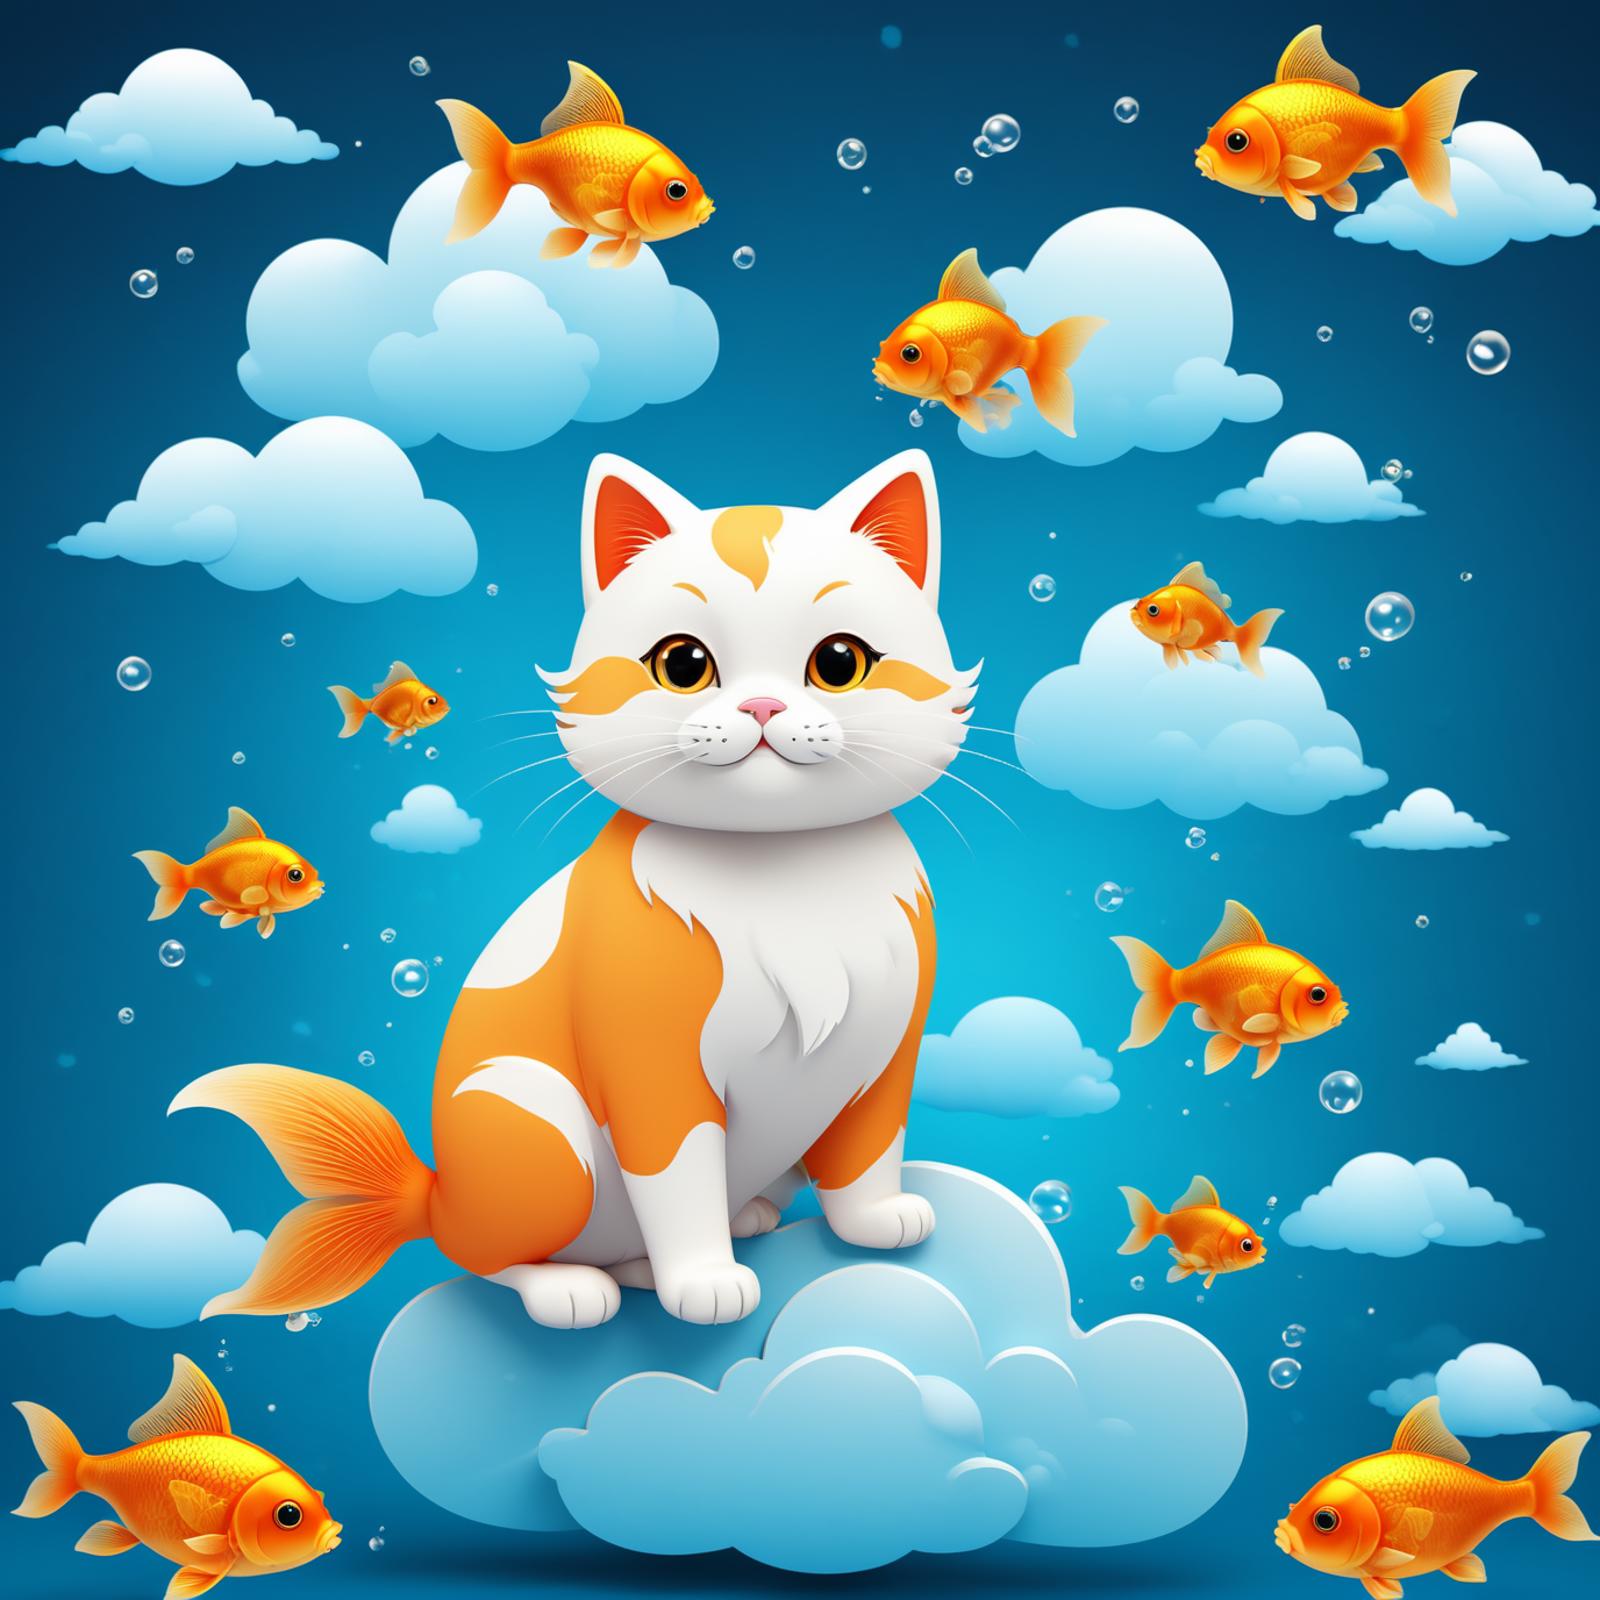 A White and Orange Cat Sitting on a Cloud with Fish Swimming Around